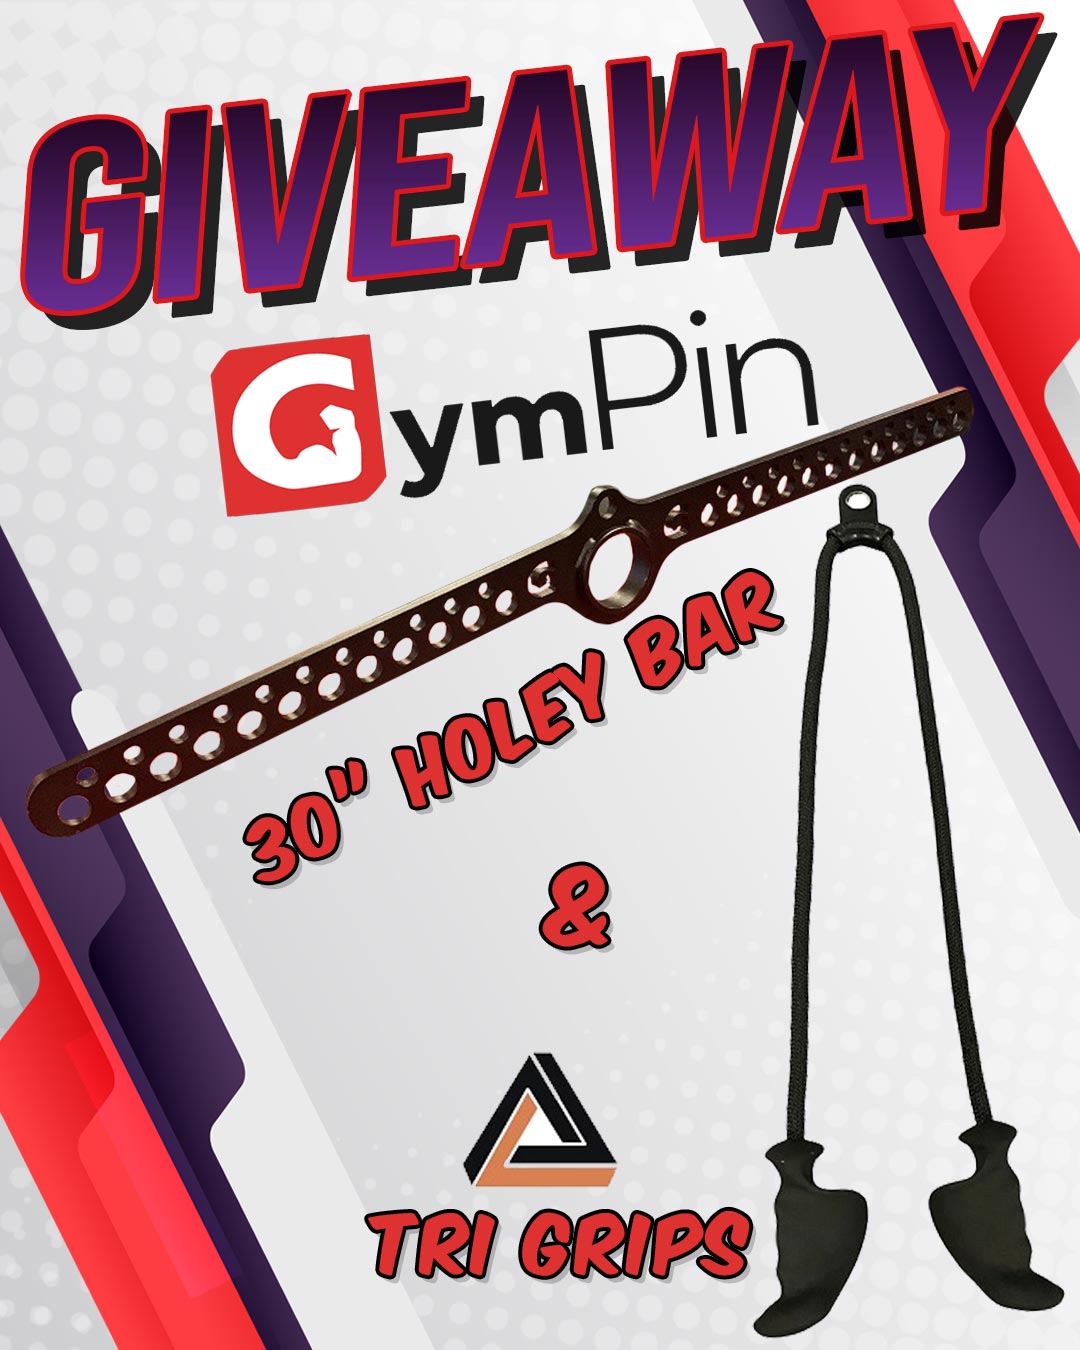 GymPin Giveaway